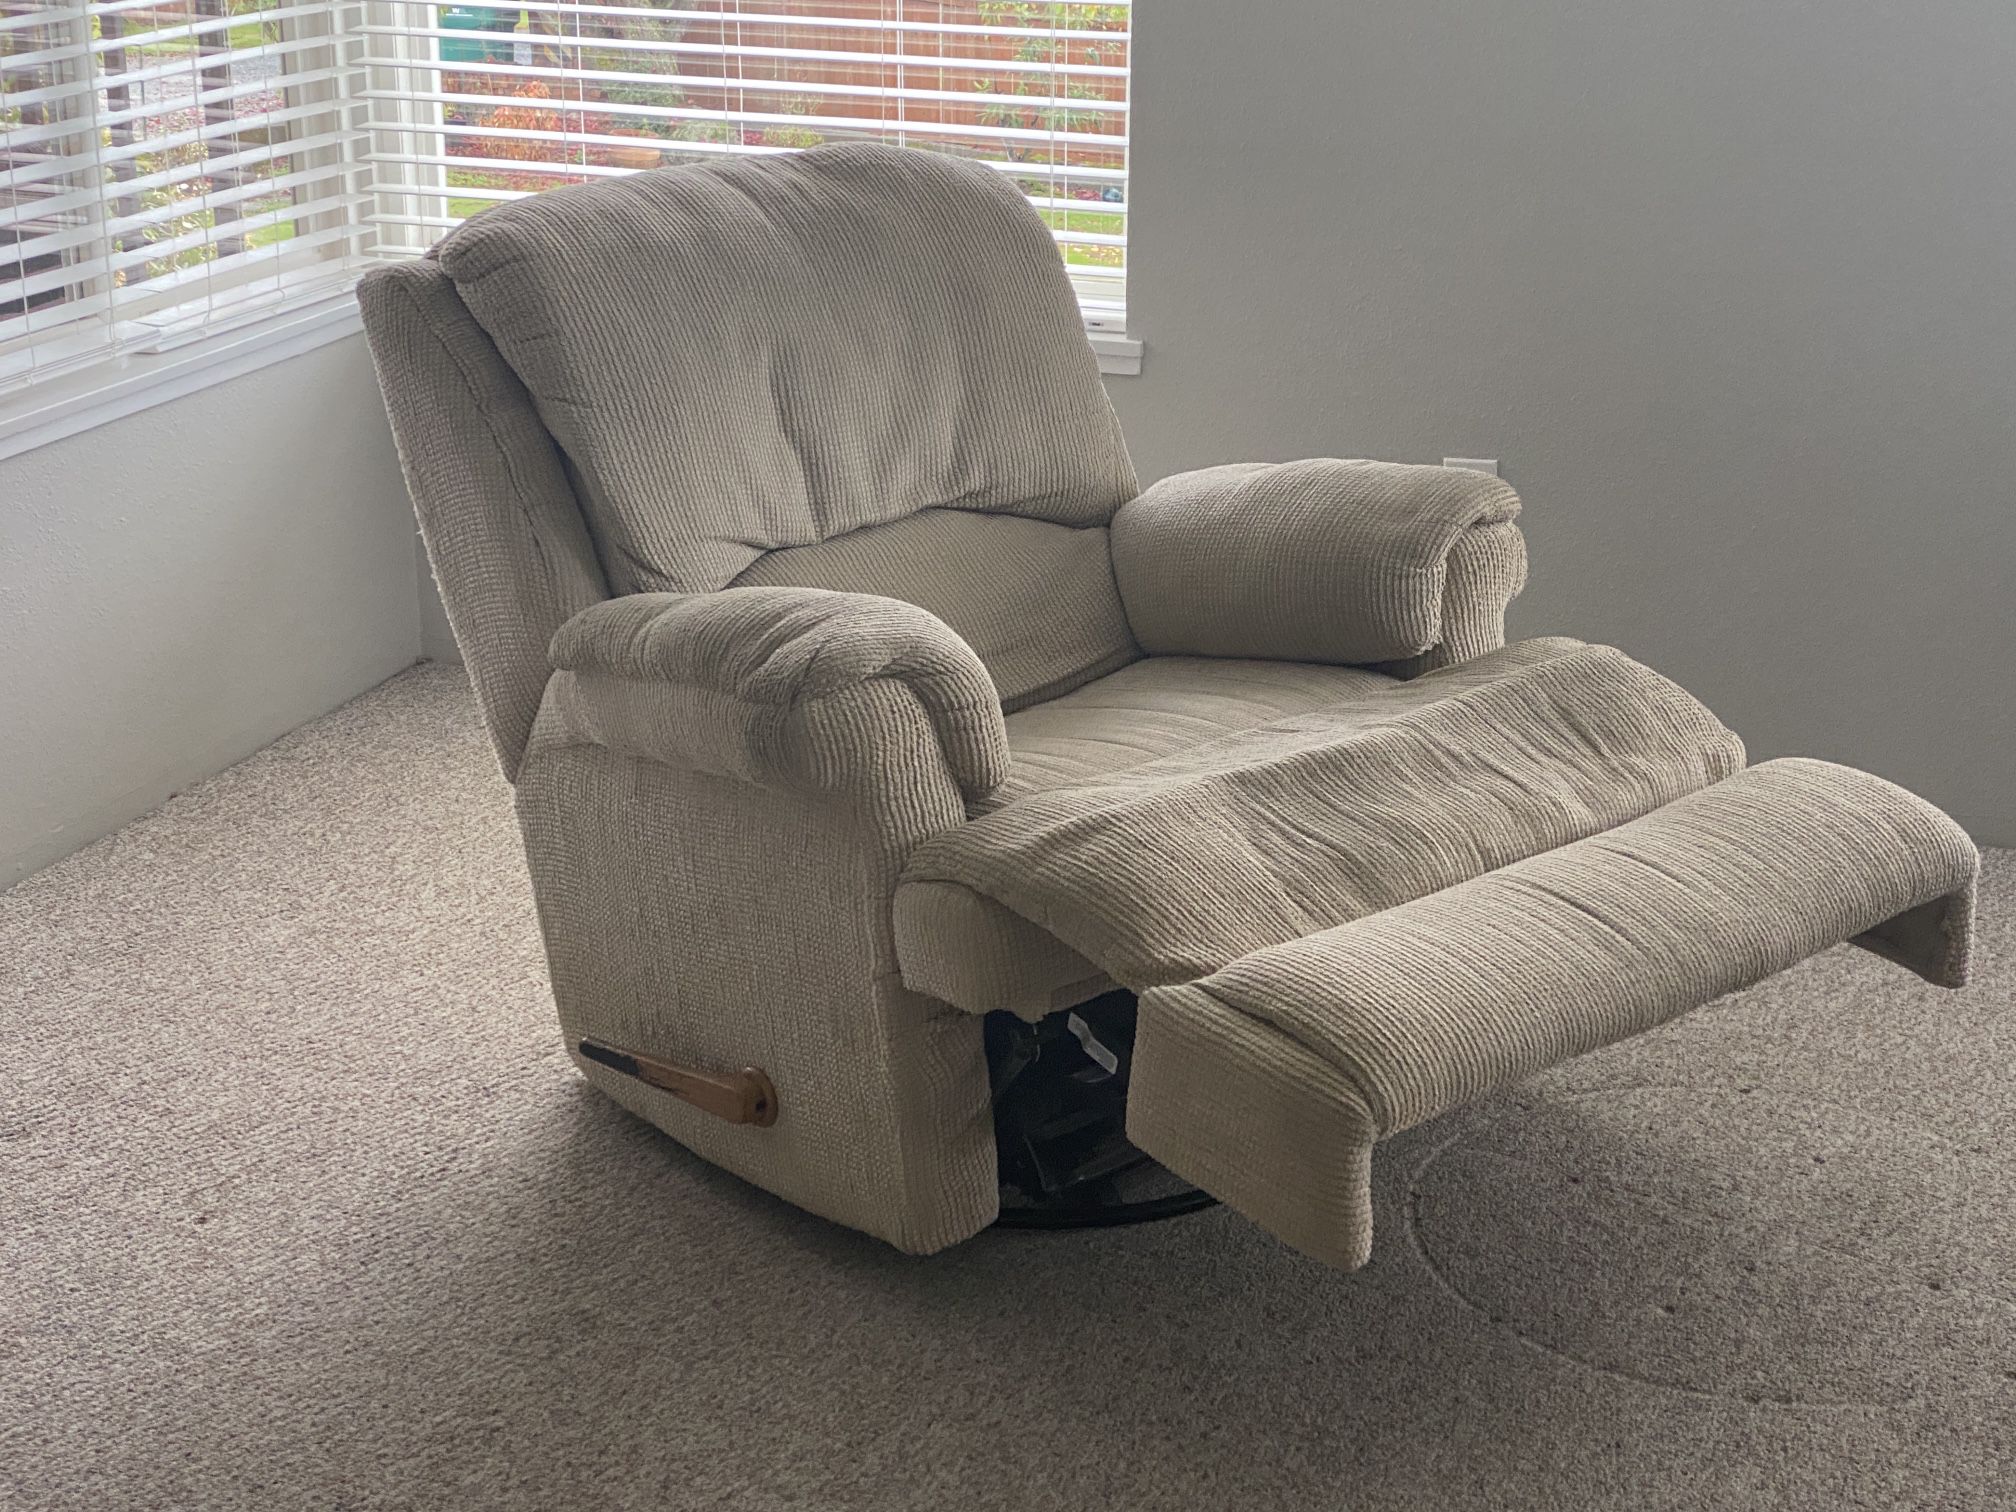 Recliner rocker swivel good condition oversized From Smoke Free Home